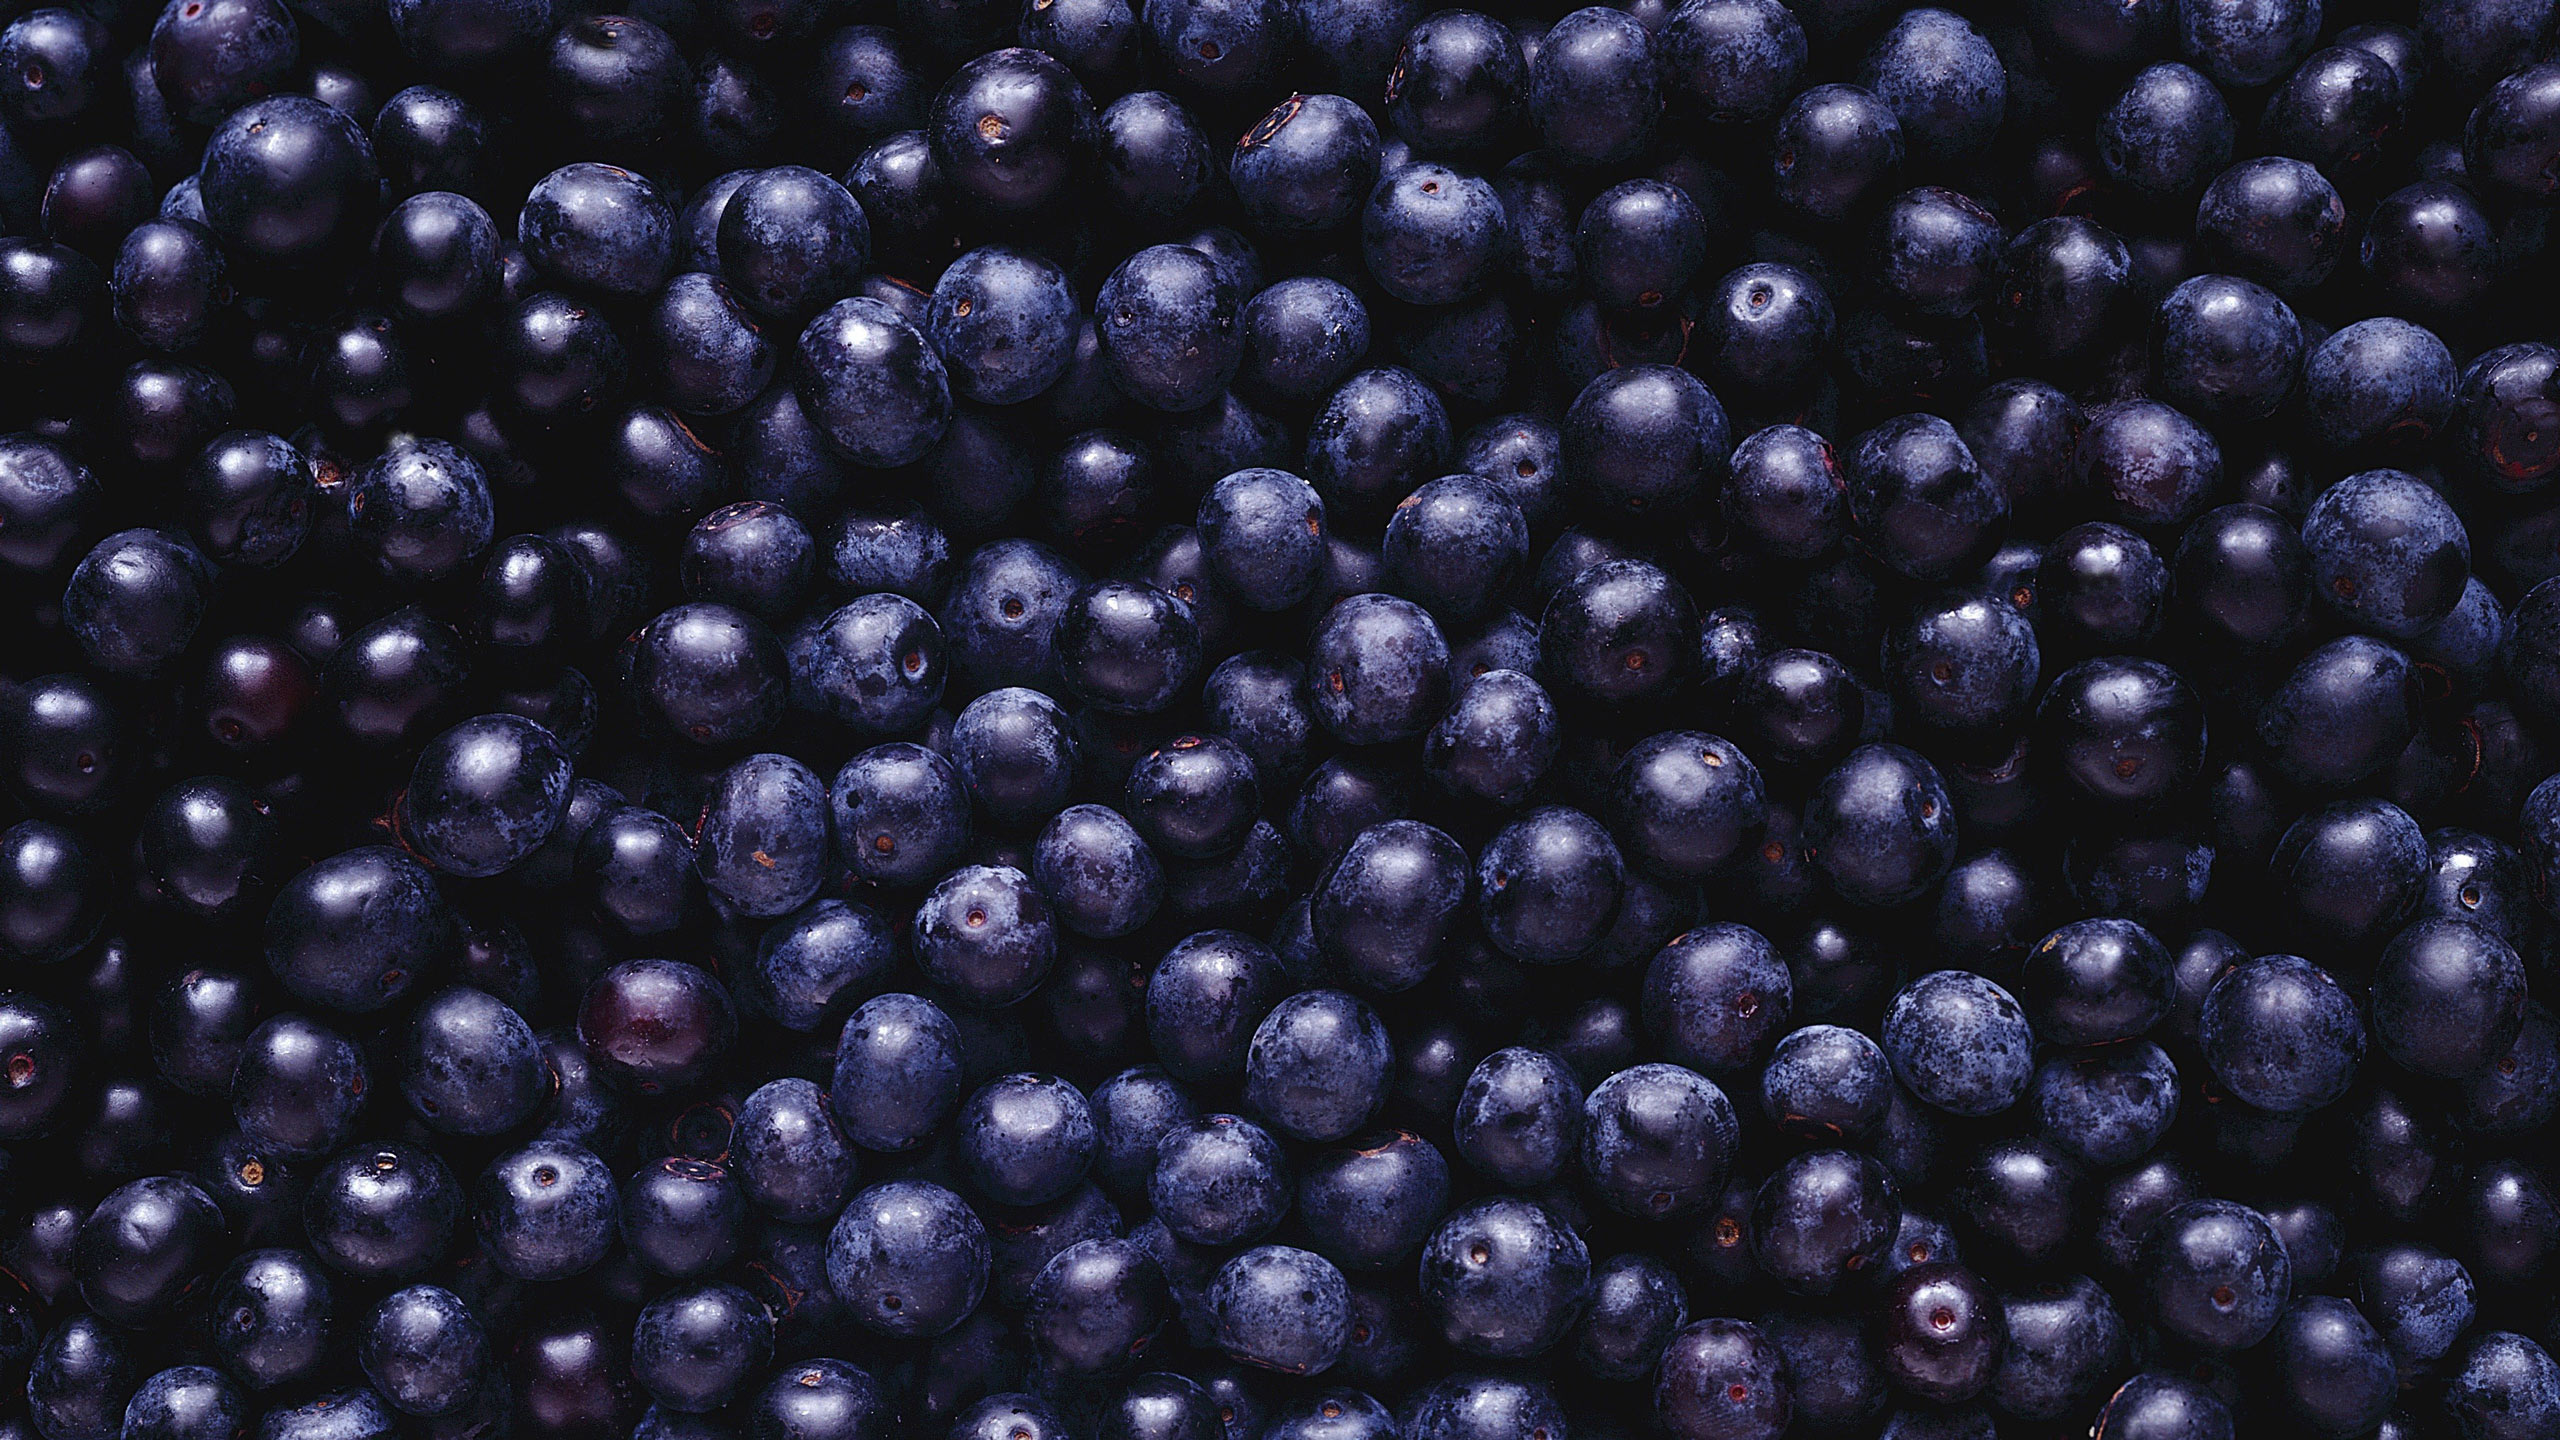 Huckleberry: Blueberries, Small blue or purple fruits that grow on bushes. 2560x1440 HD Wallpaper.